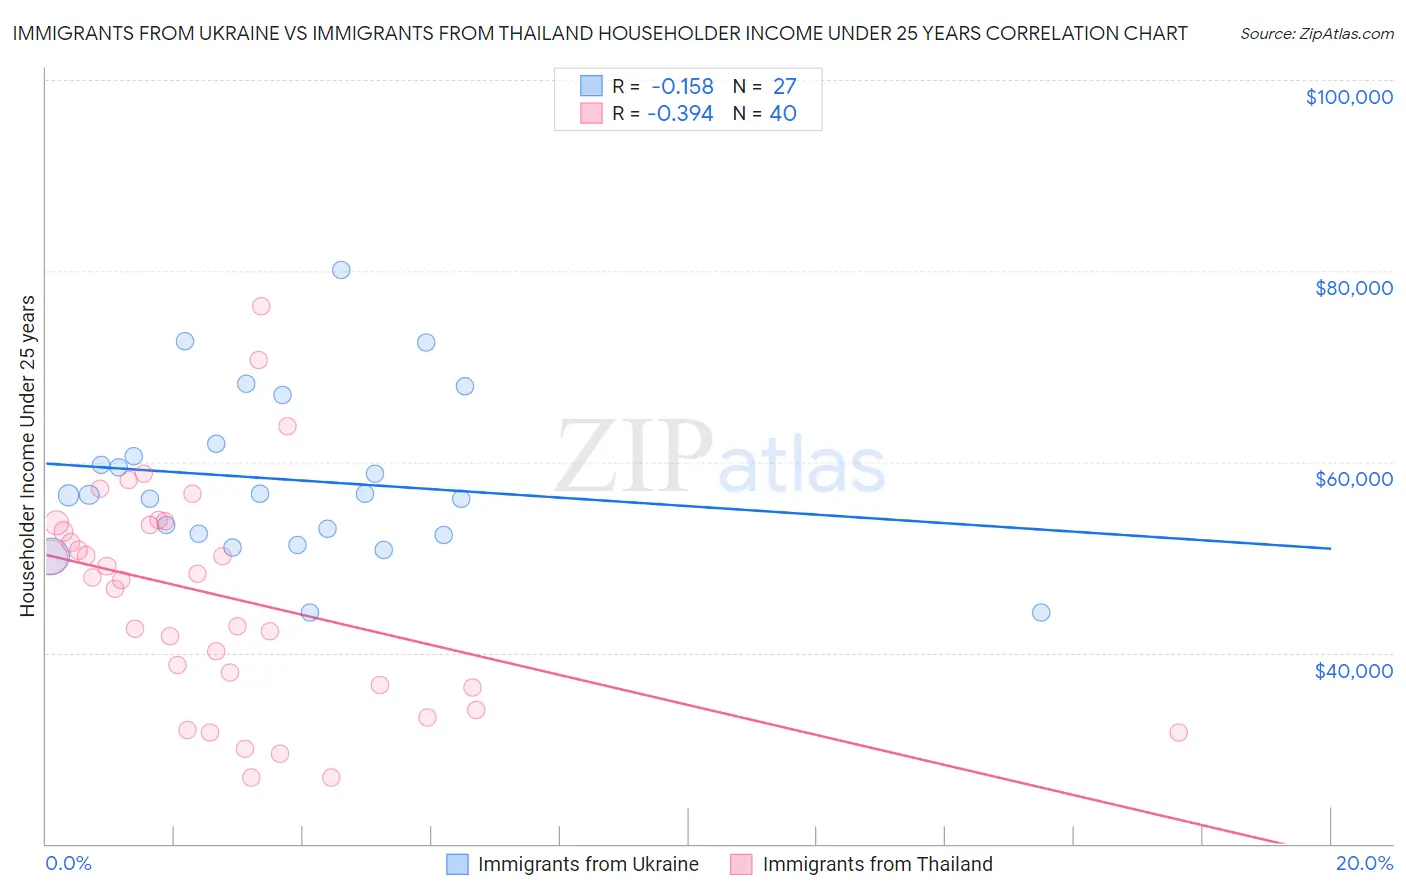 Immigrants from Ukraine vs Immigrants from Thailand Householder Income Under 25 years